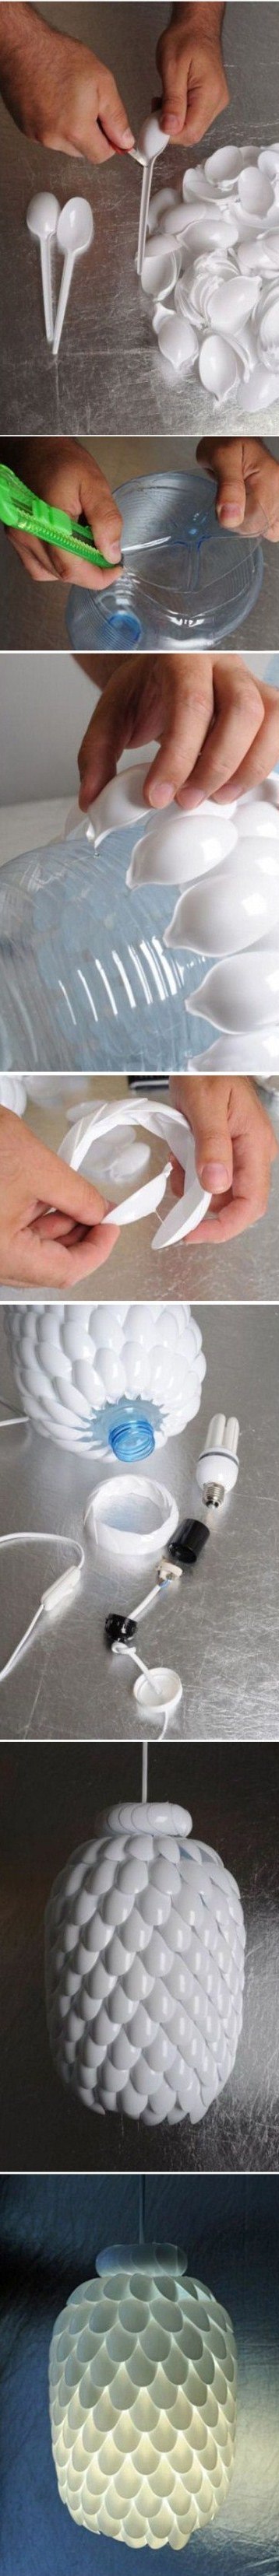 Lamp Shade from spoons